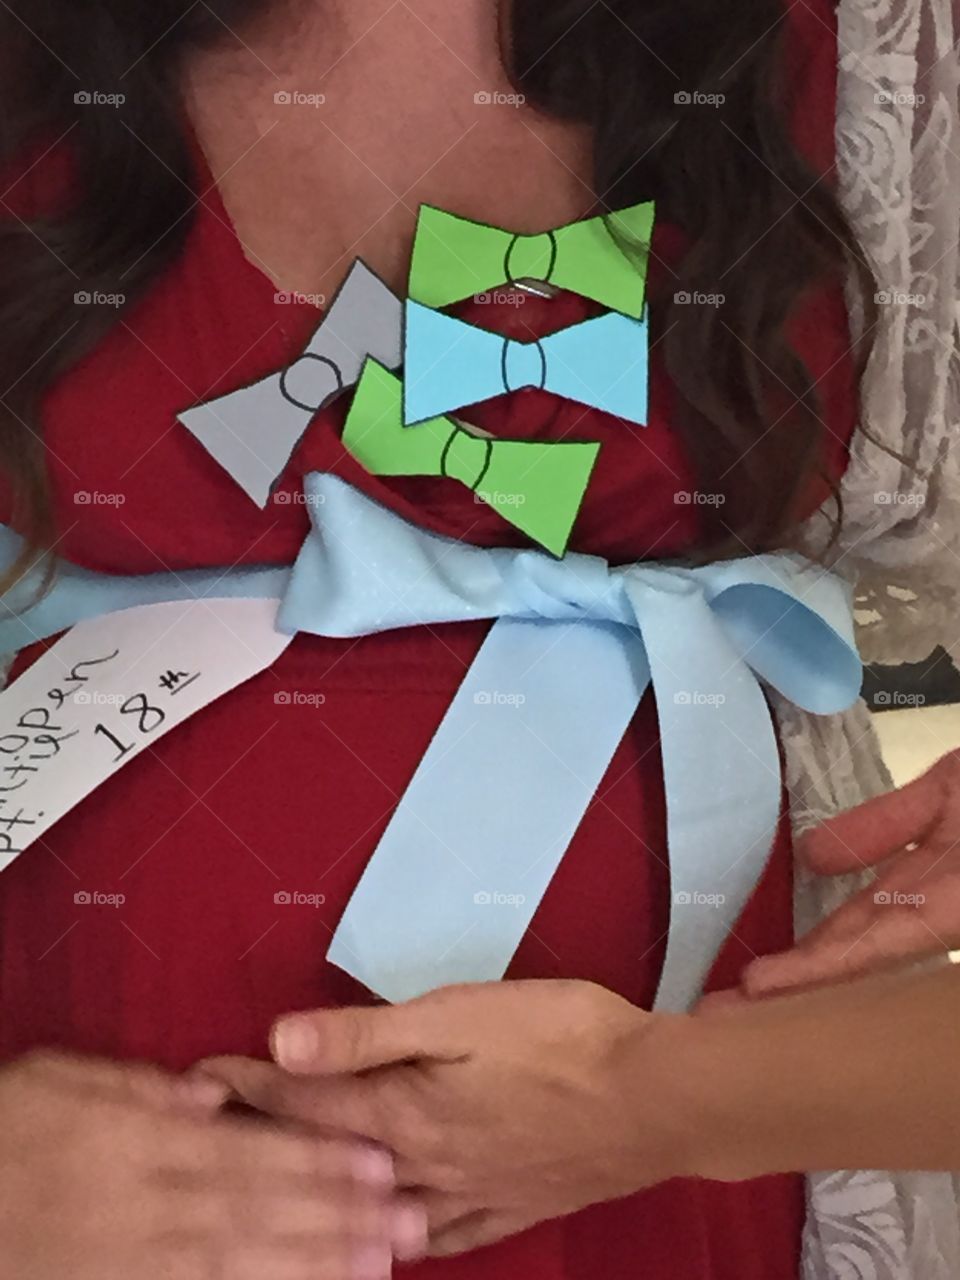 Pregnant young woman's tummy decorated for the shower that was given for her.